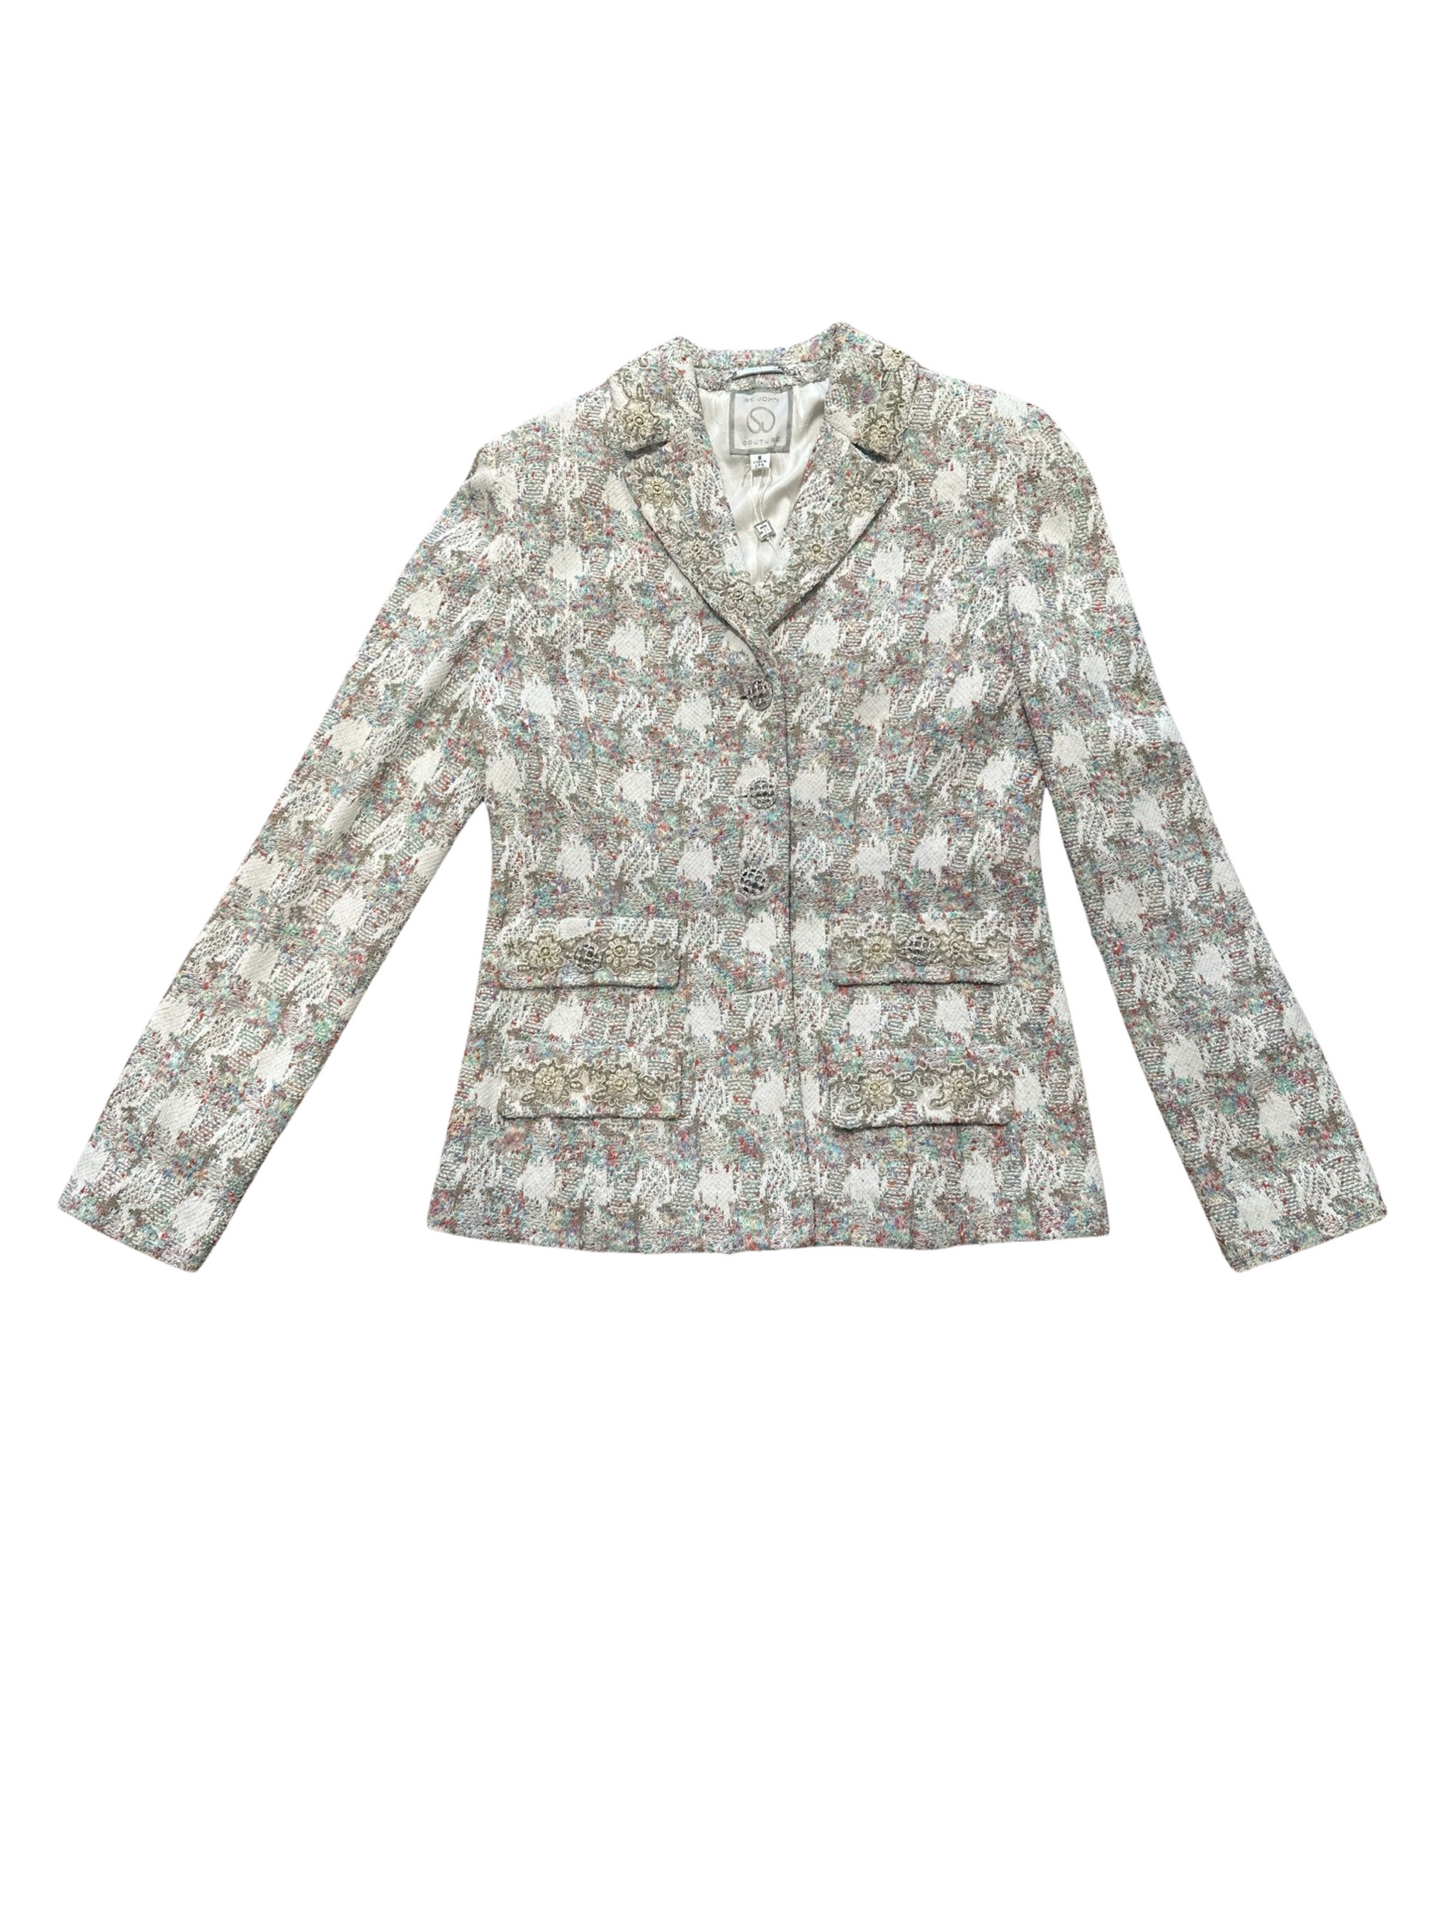 St. John Knits Couture Plaid Tweed Crystals Buttons Blazer